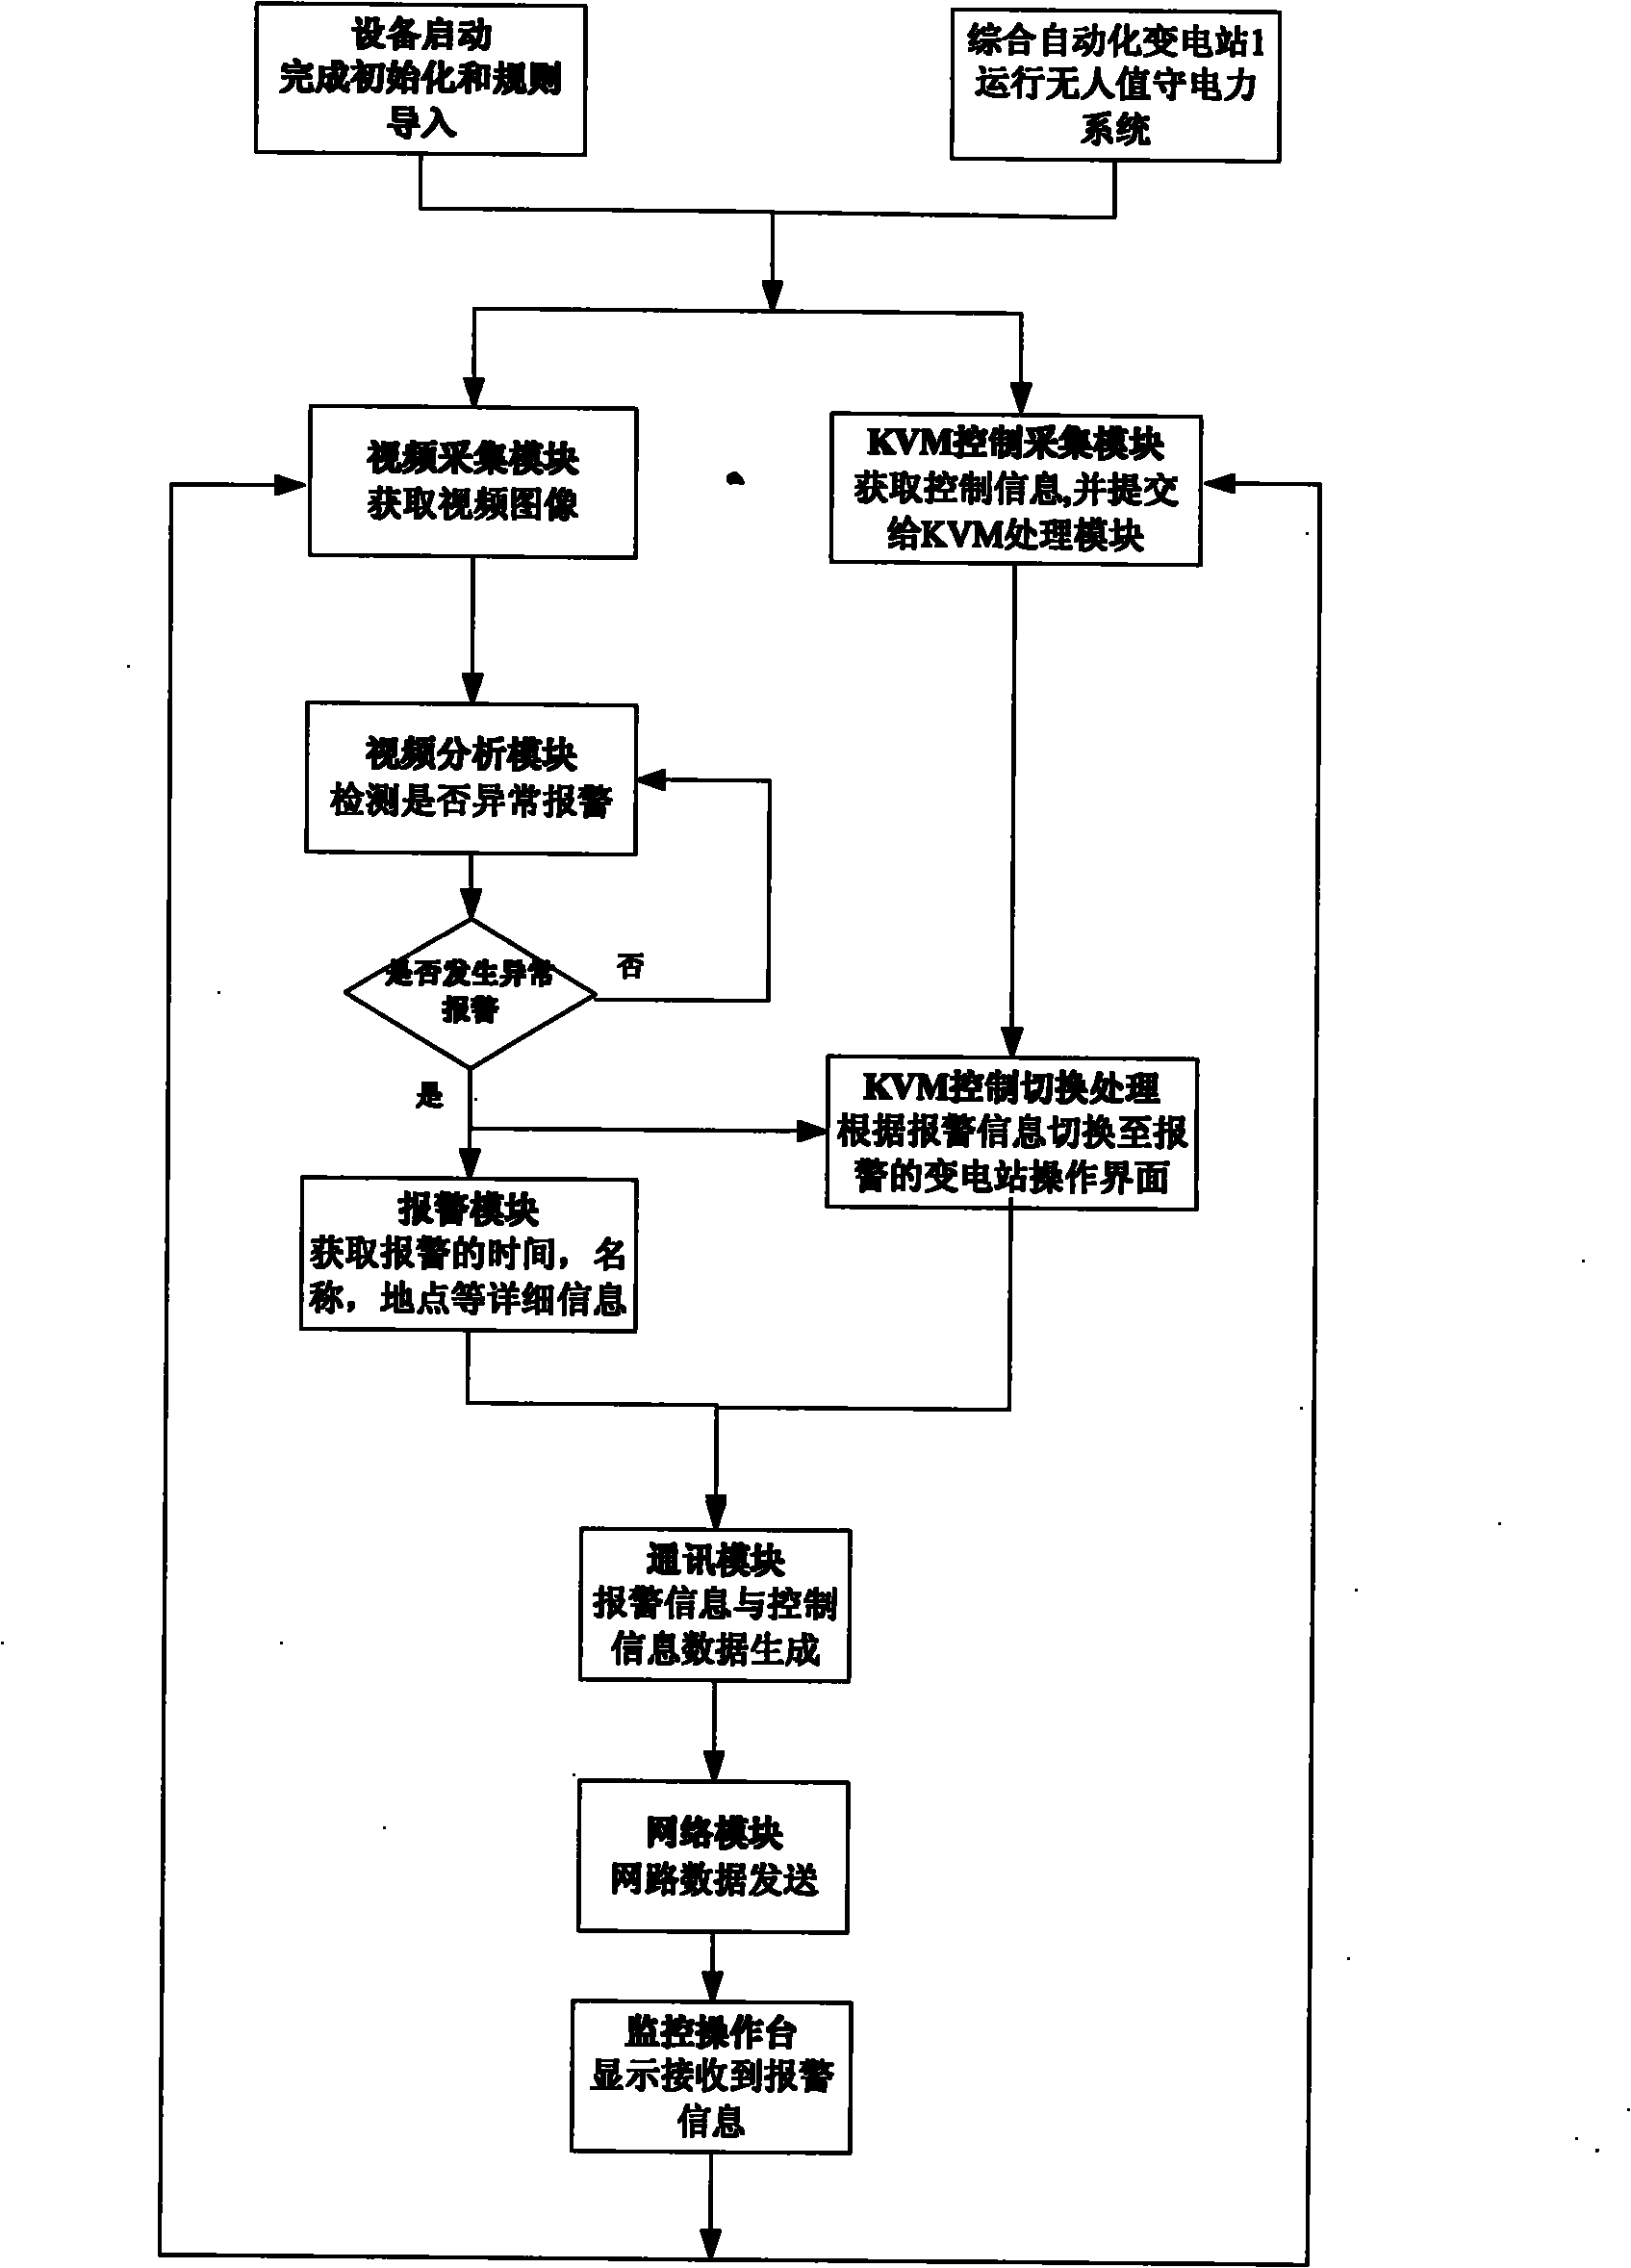 Network-based multi-station monitoring integrated matrix display control system